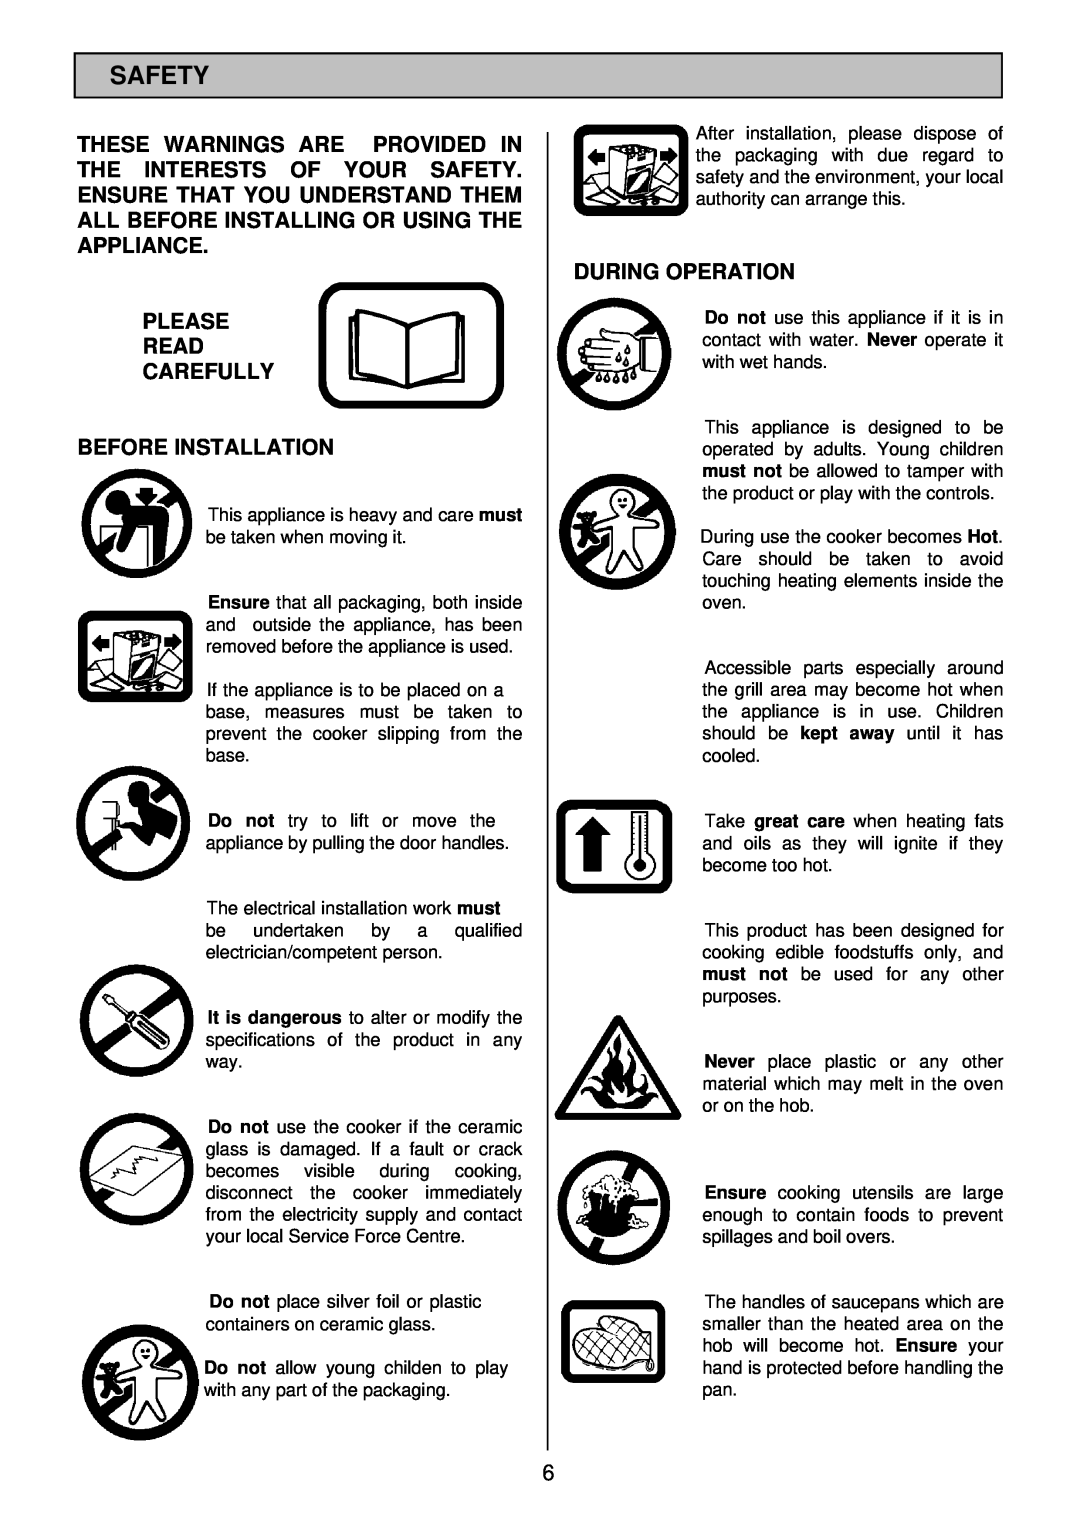 Tricity Bendix SI 453 installation instructions Safety, Please Read Carefully Before Installation, During Operation 